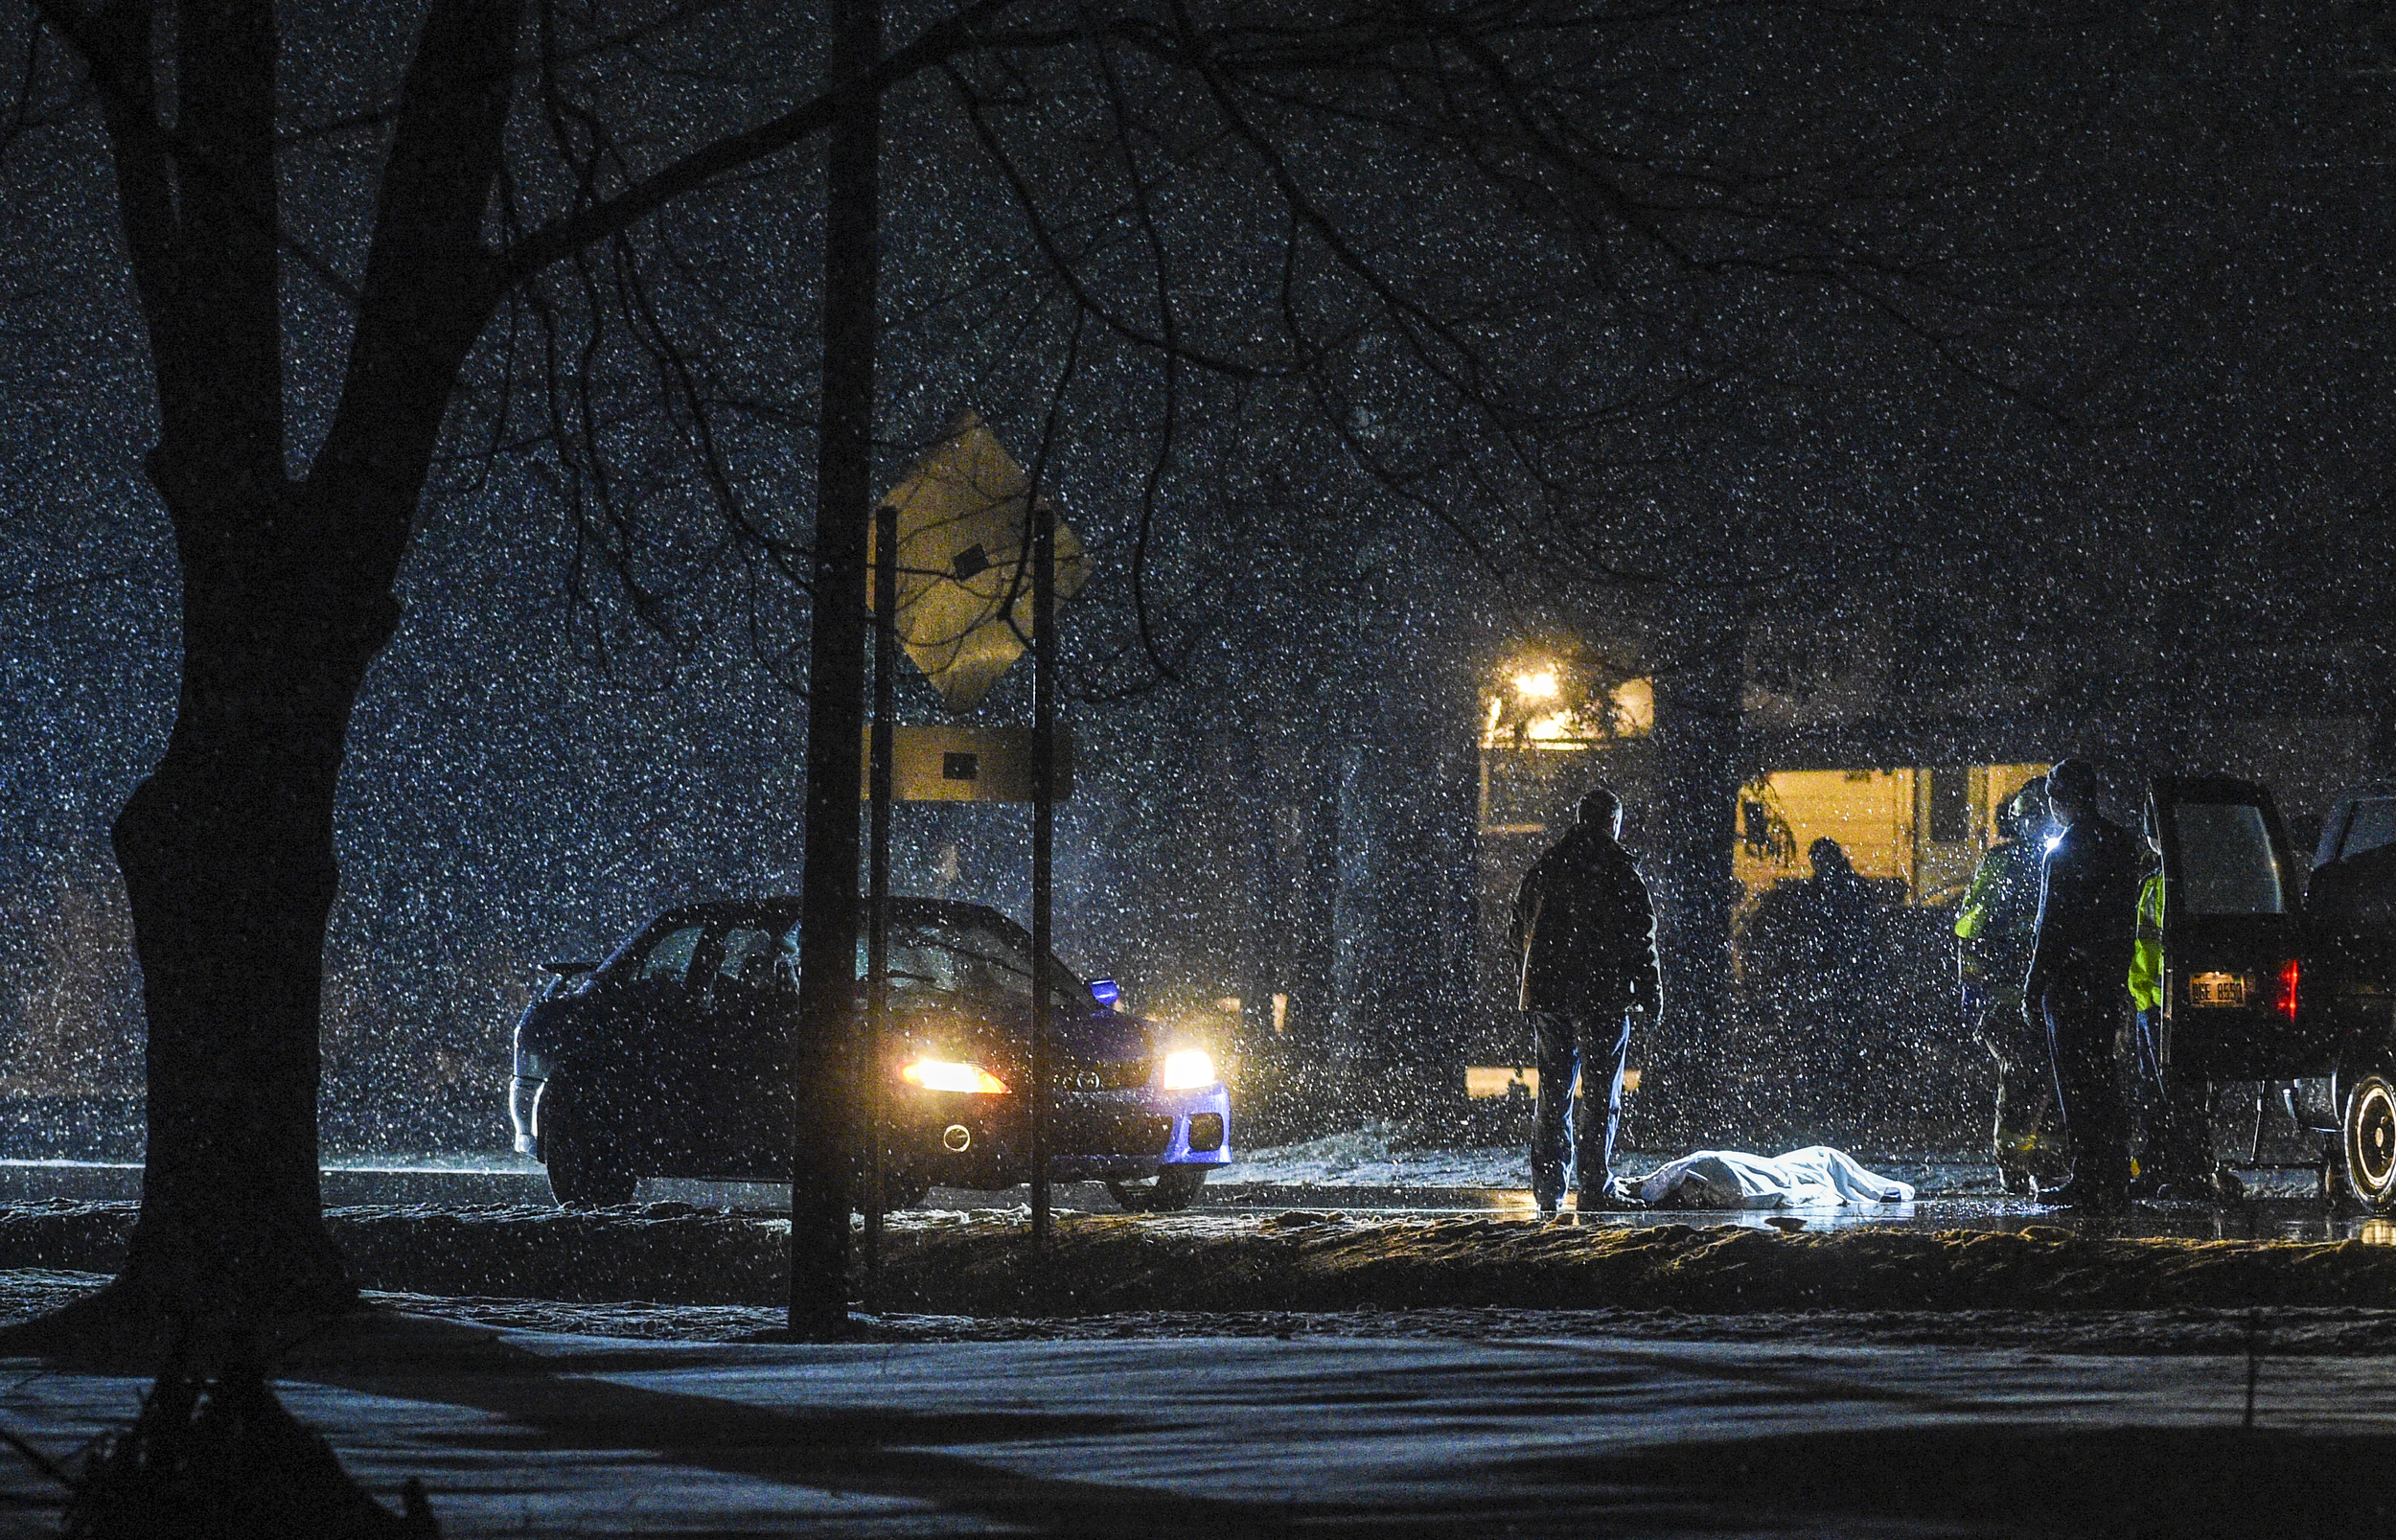  Walker Police cover the deceased body of an 84-year-old man after he was struck and killed while attempting to cross Wilson Avenue Tuesday evening, Dec. 29, 2015, in Walker, Mich. The 19-year-old driver attempted to stop, but could not avoid strikin